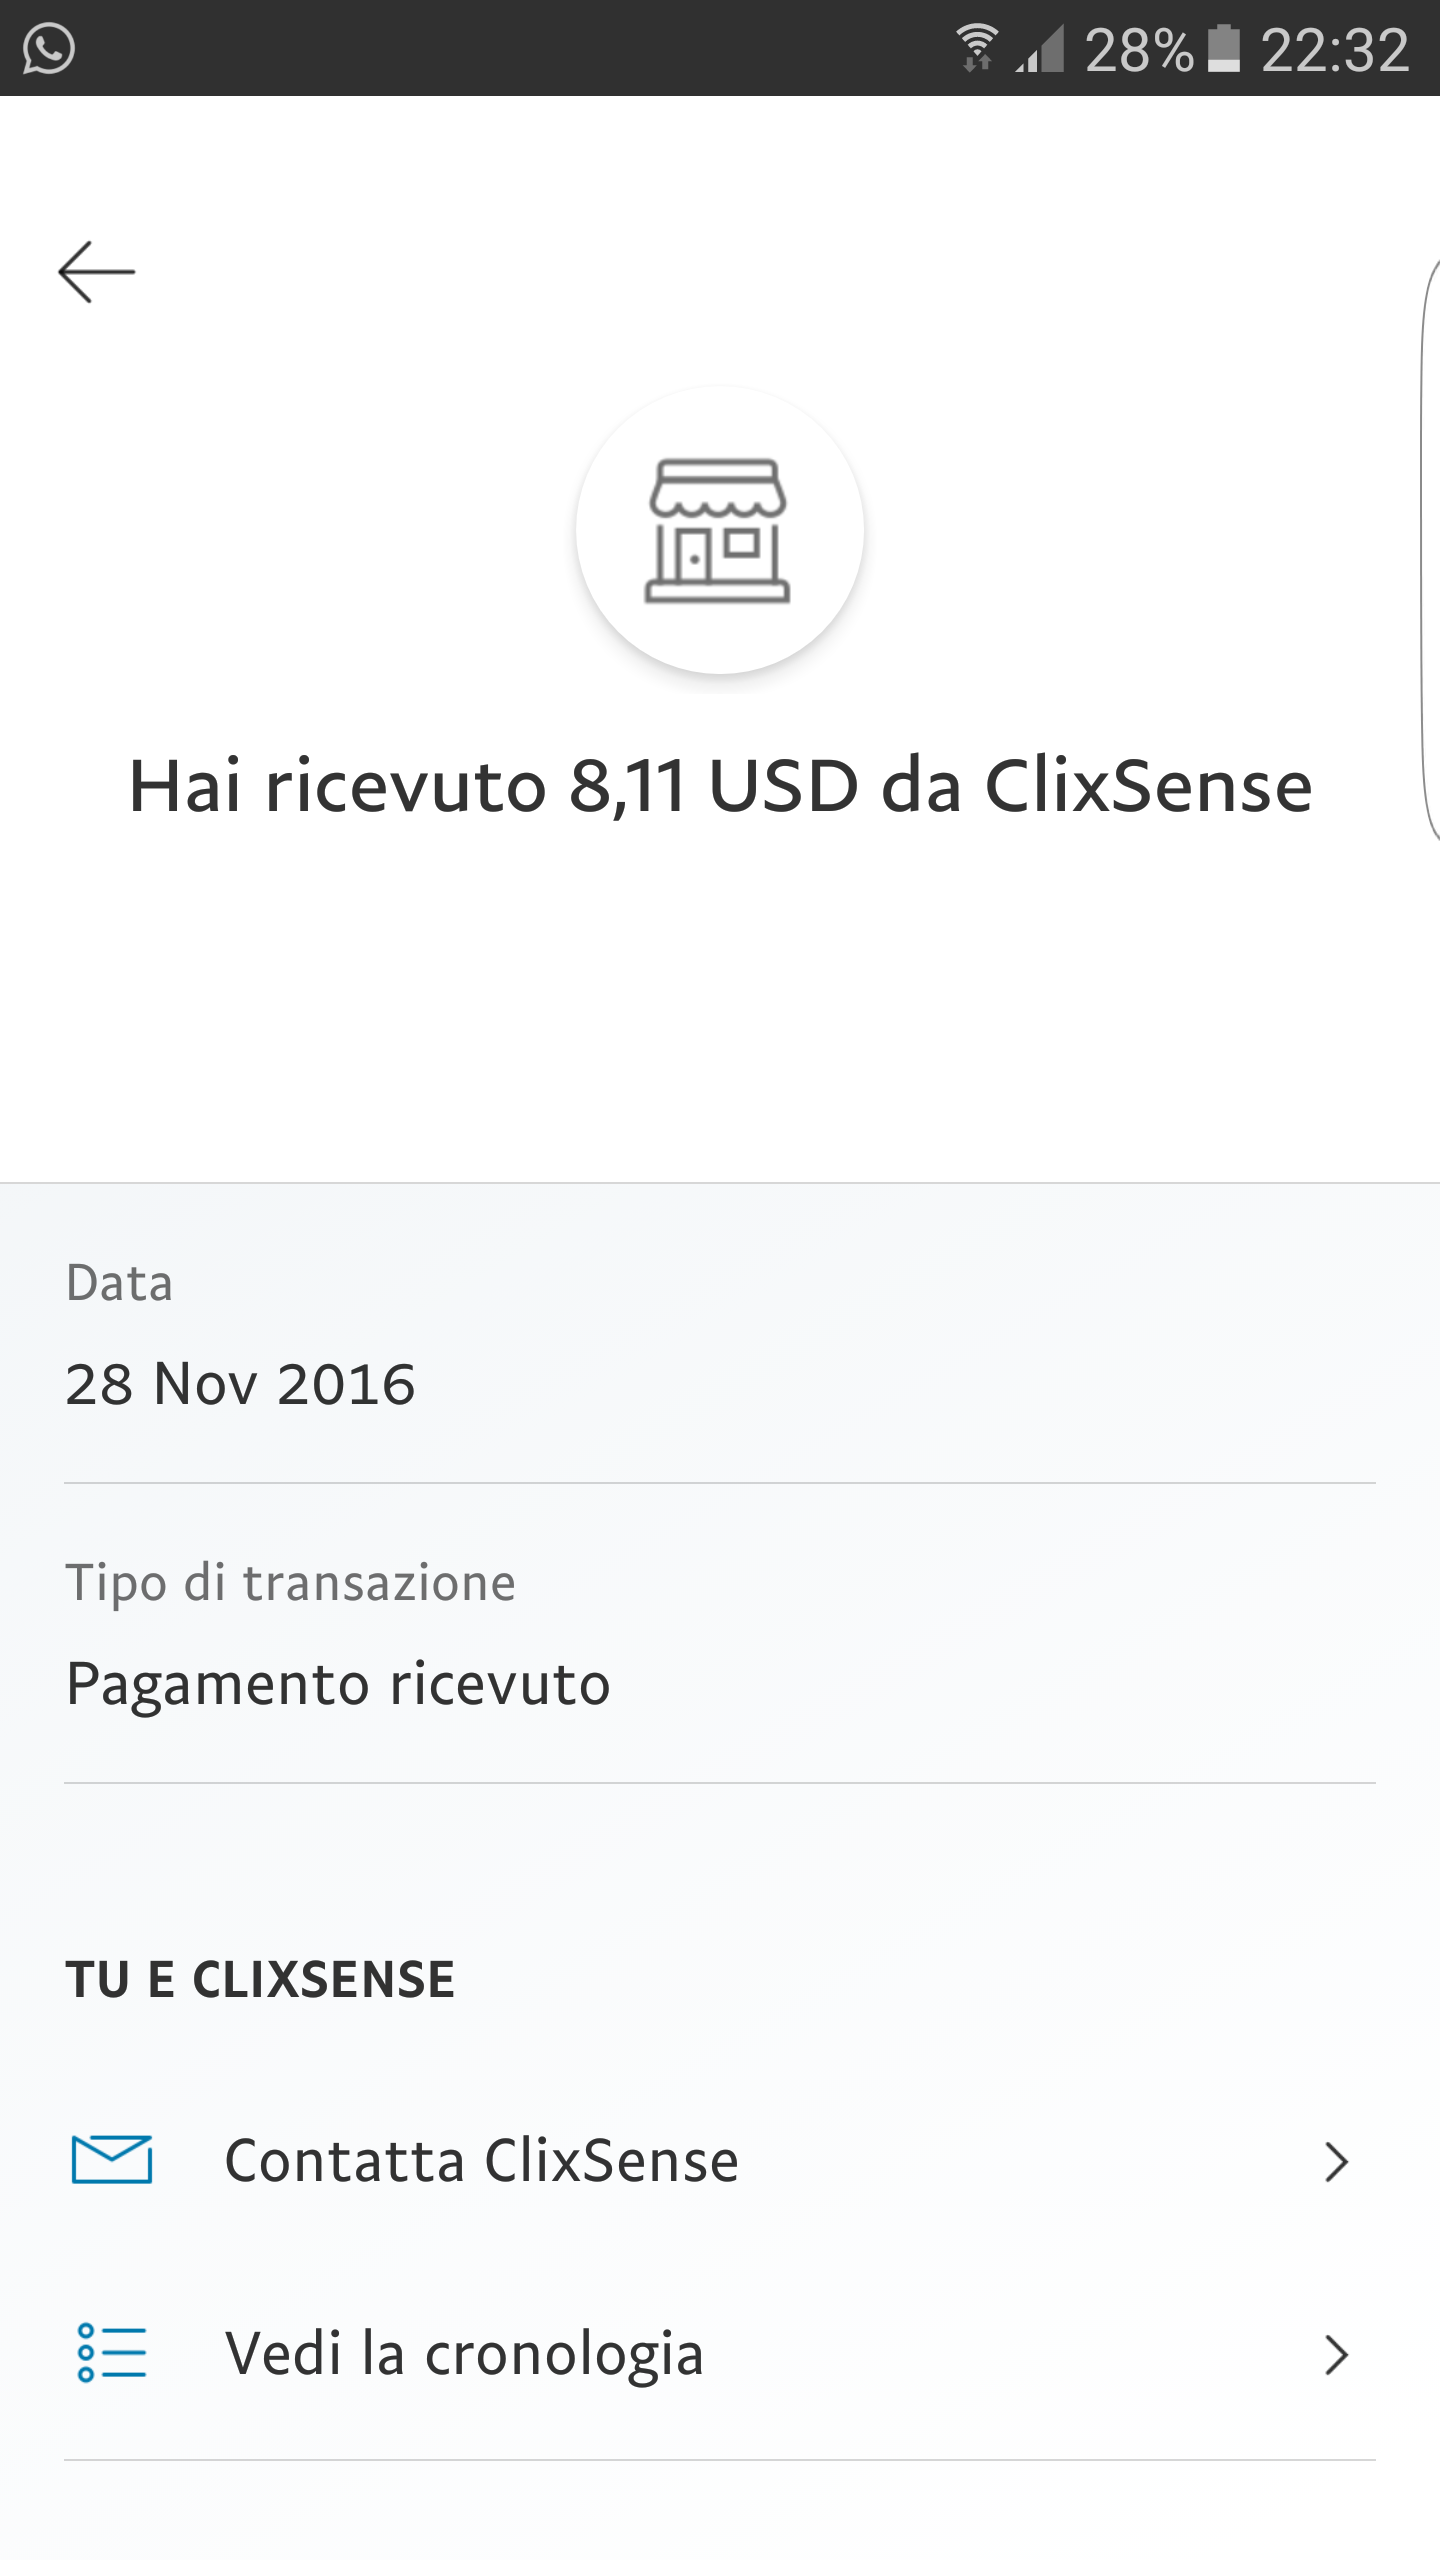 Payment 1906 for Ysense